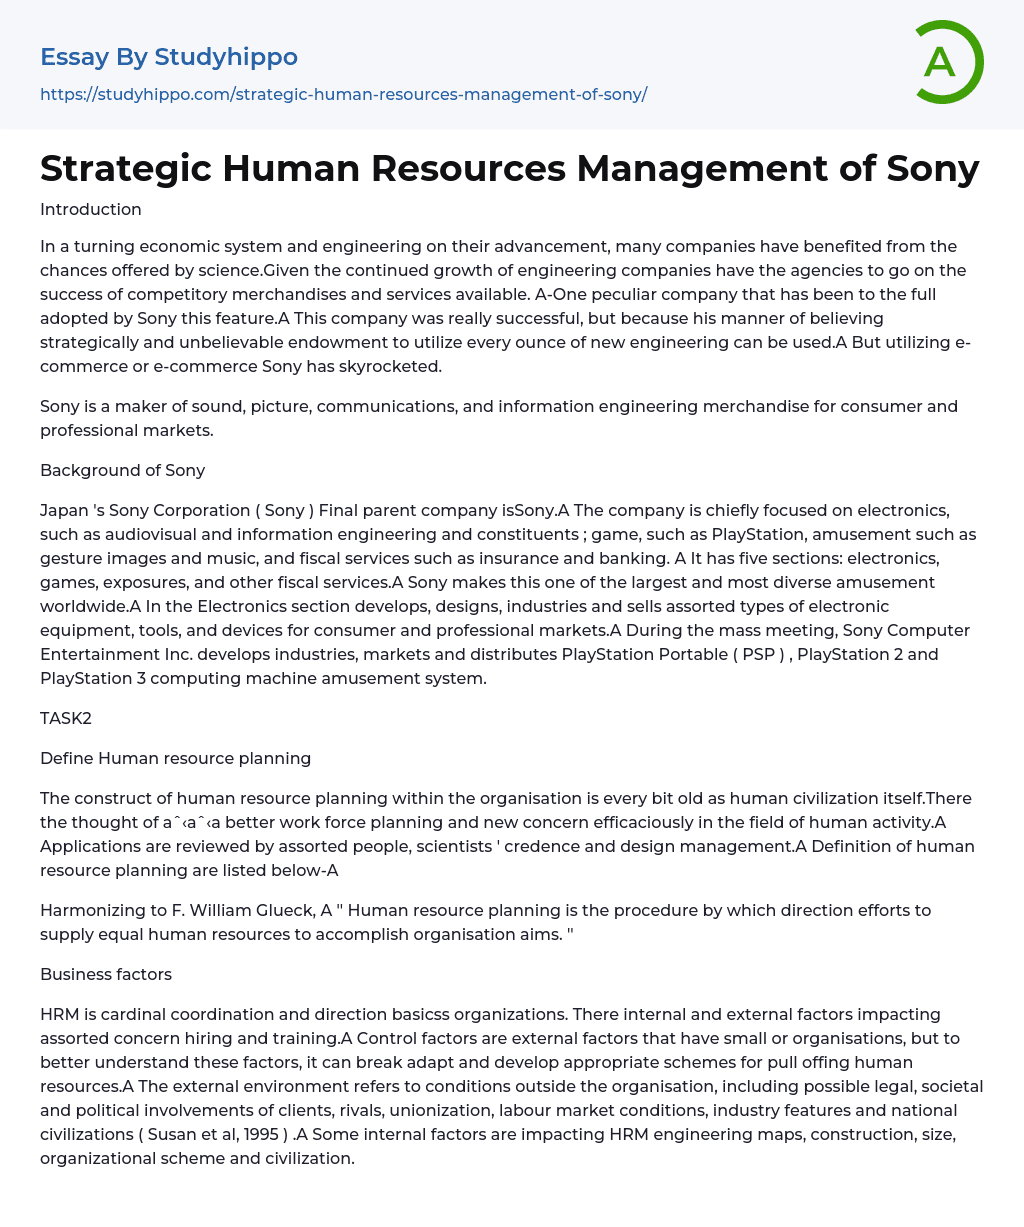 Strategic Human Resources Management of Sony Essay Example